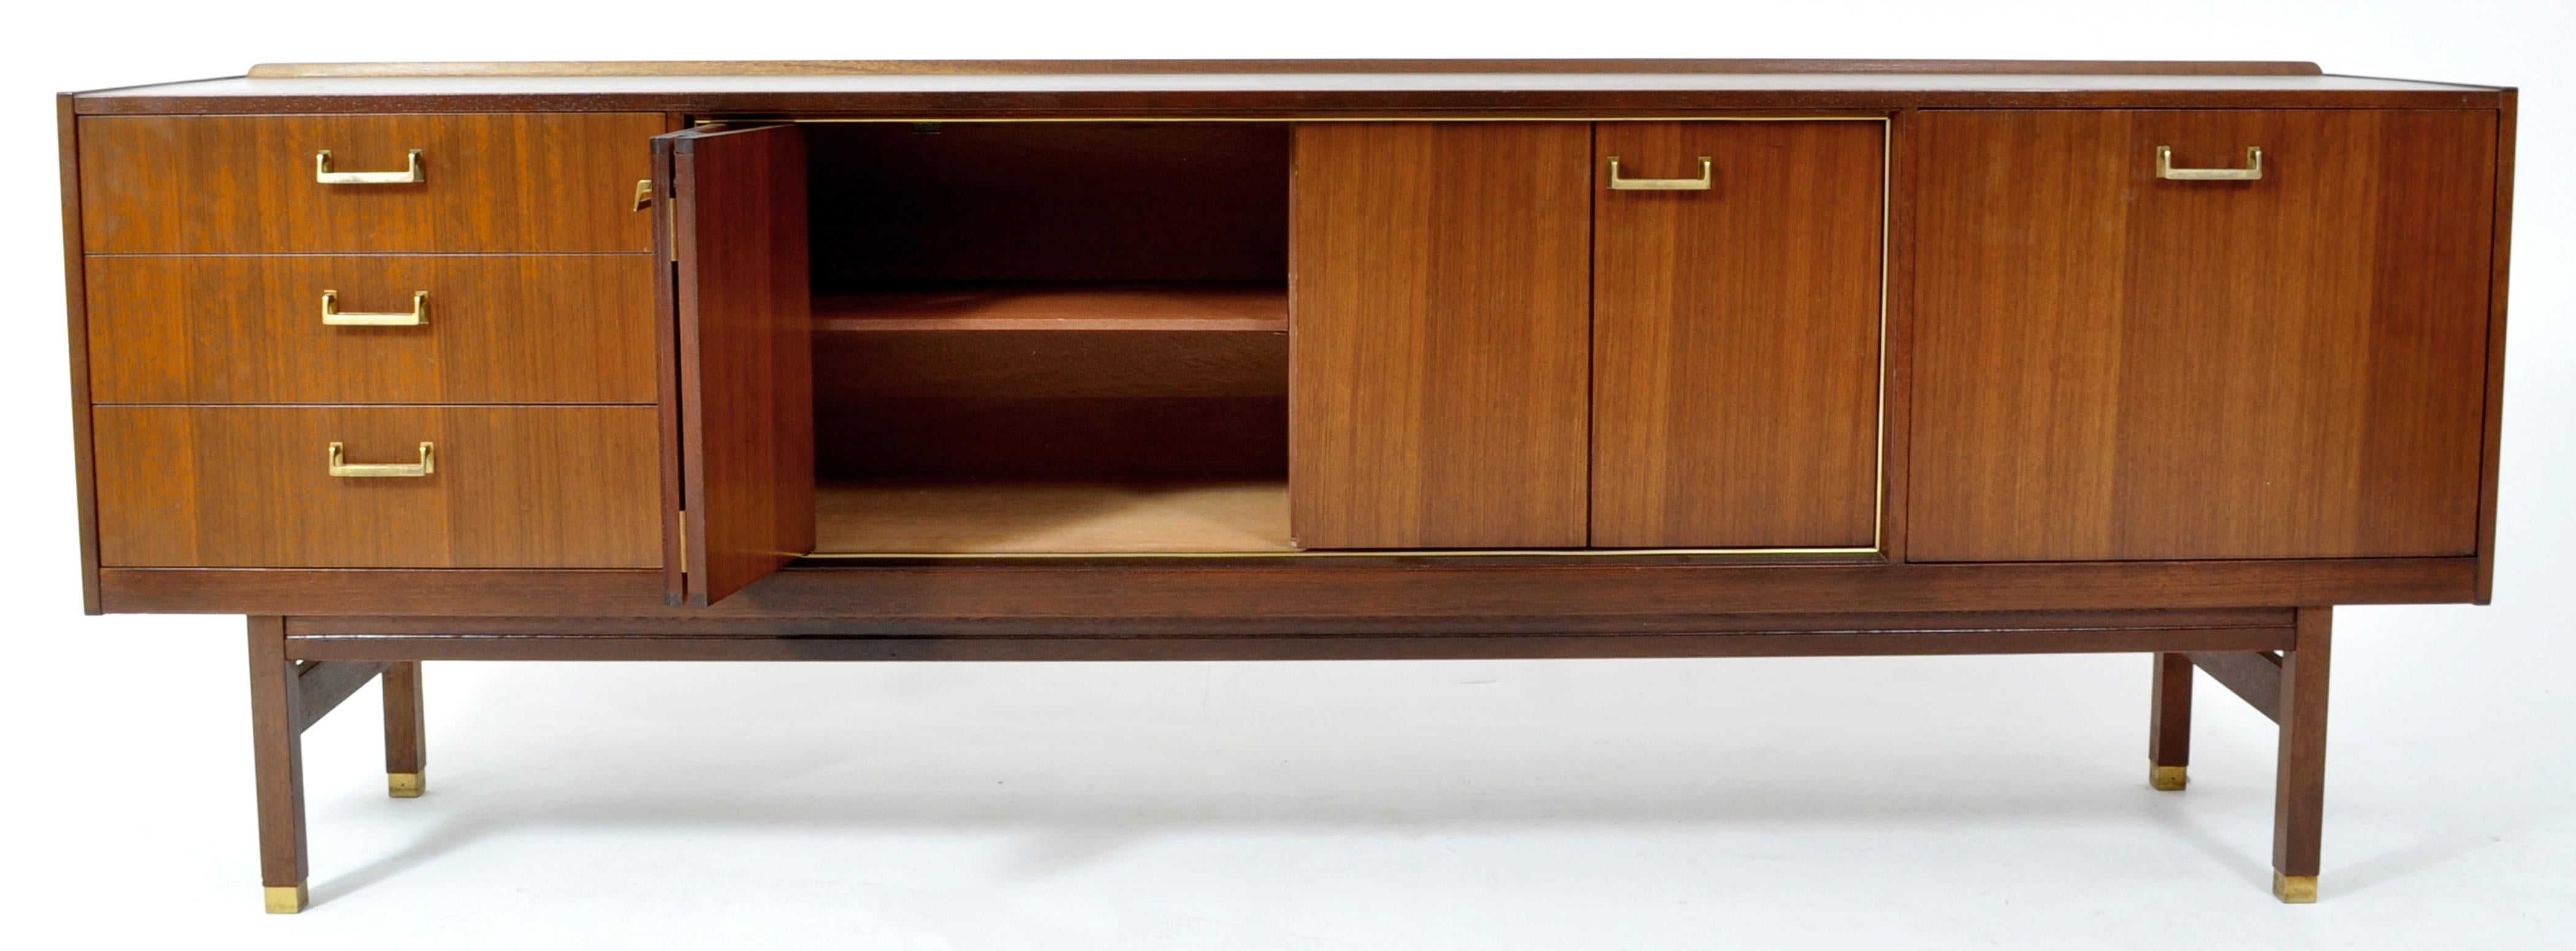 Mid-Century Modern Danish style credenza in Walnut by G Plan, 1960s, designed by IB. Kofod Larsen. The credenza having a central cupboard with 'concertina doors' and enclosing a divided chamber with a single shelf throughout. To the right a fall